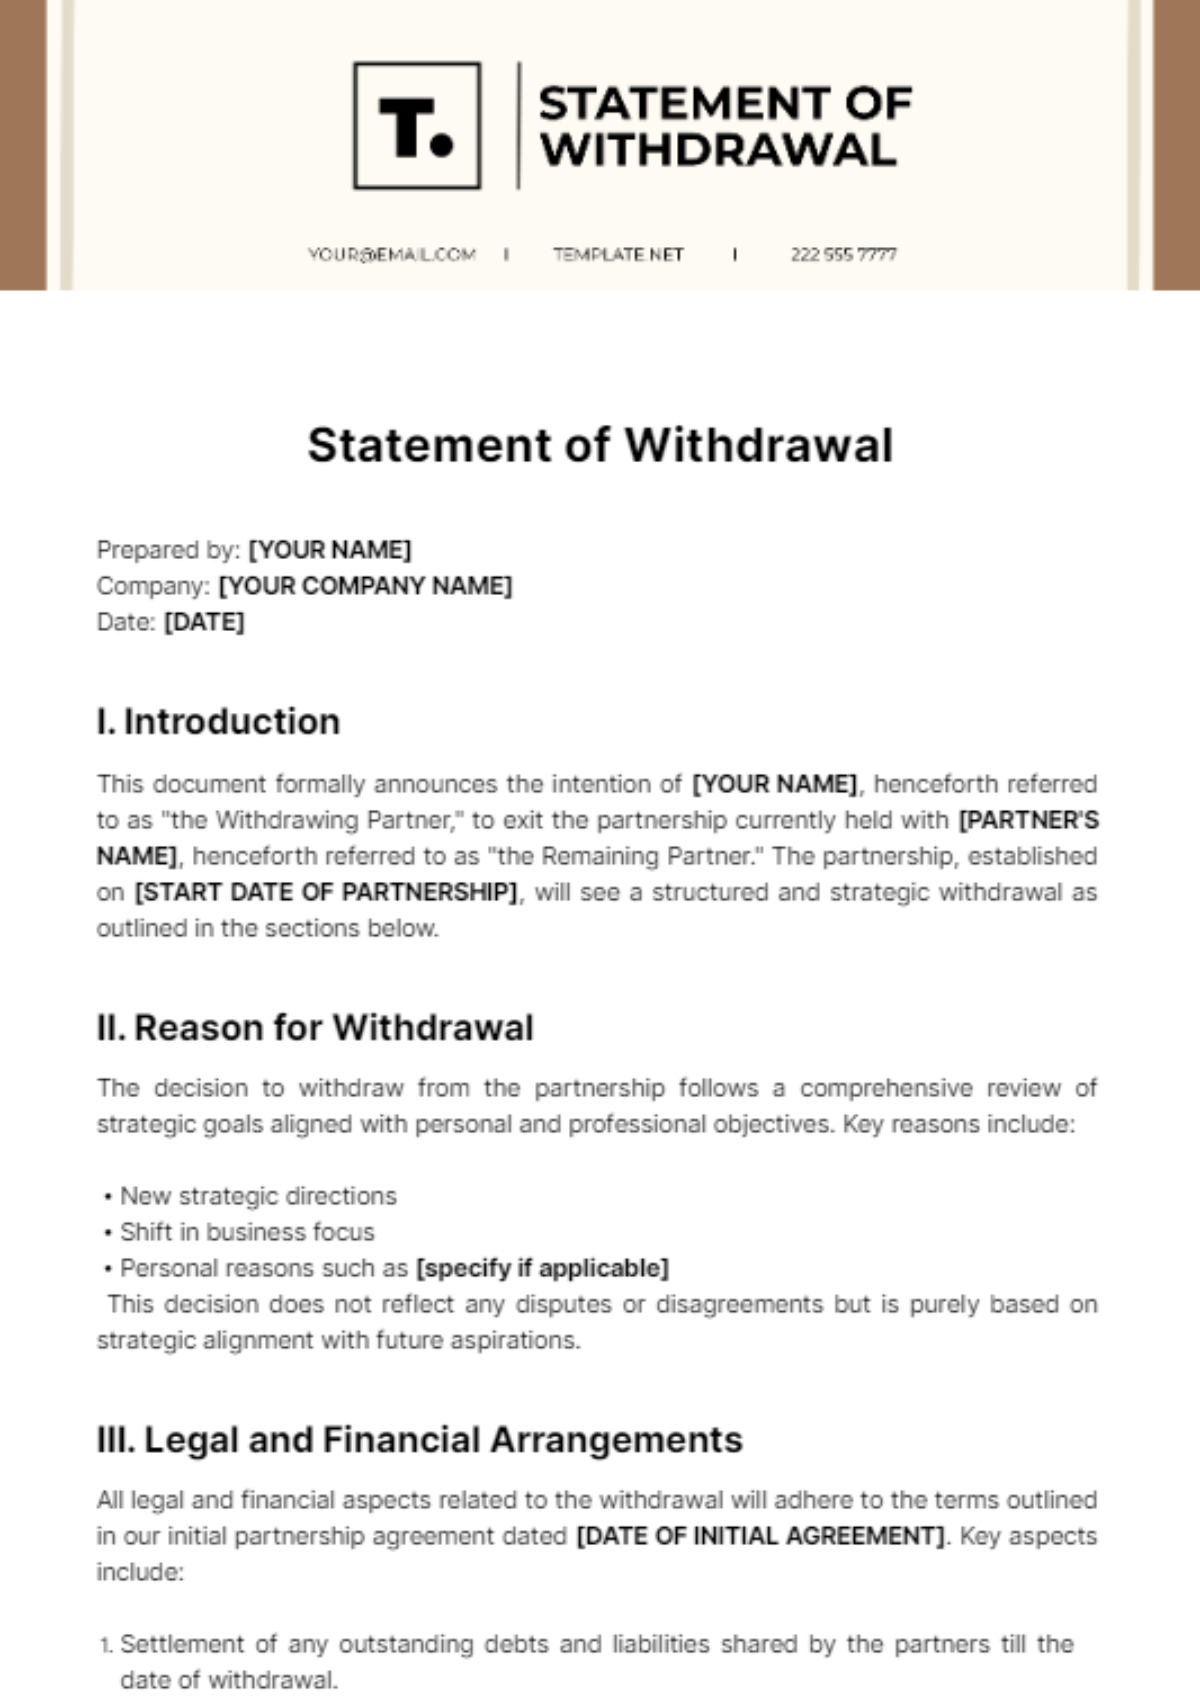 Statement of Withdrawal Template